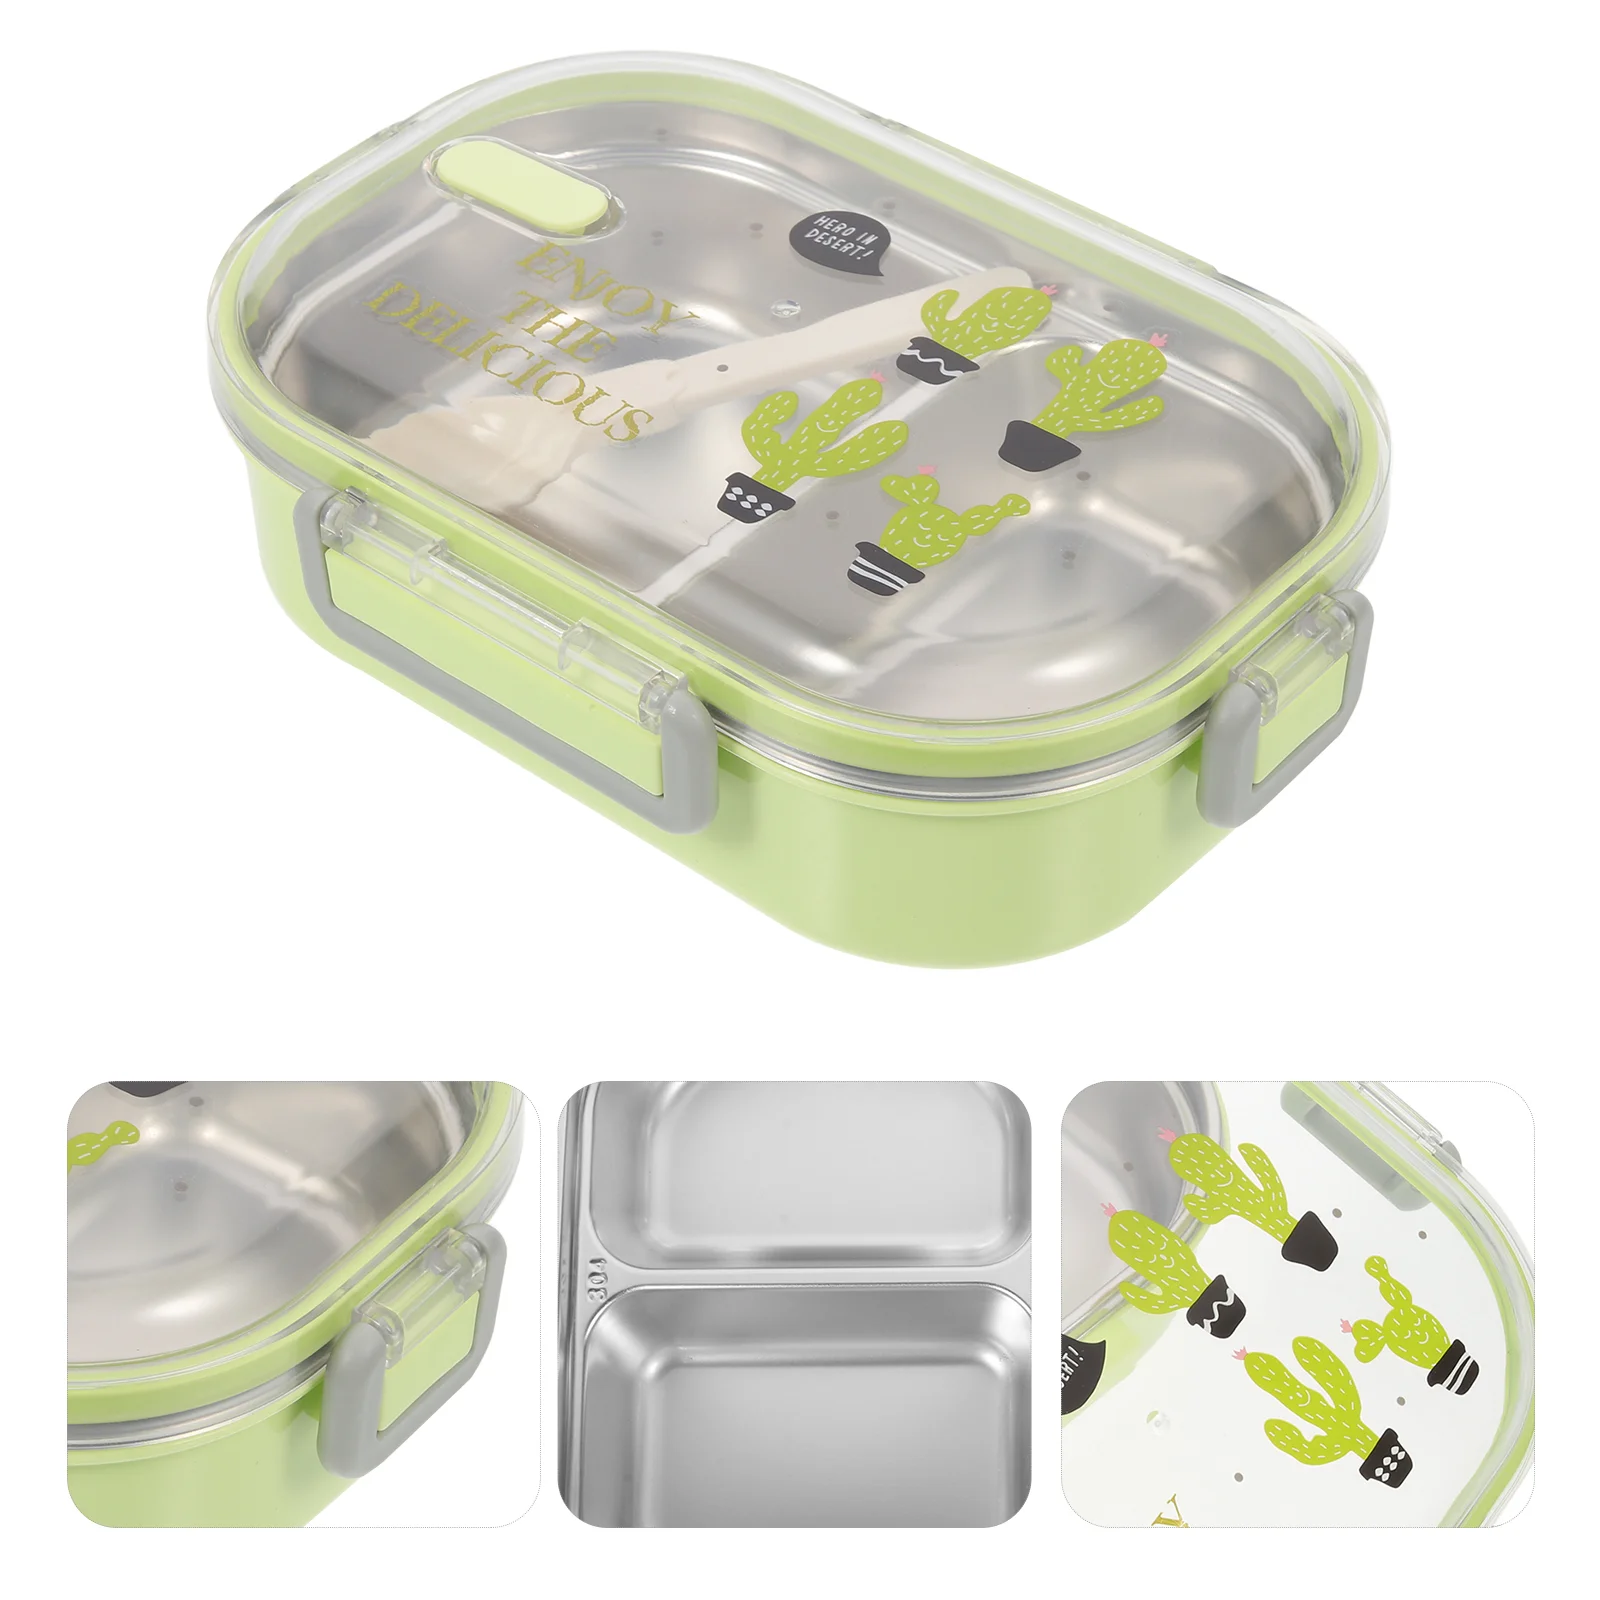 

Box Lunch Stainless Steel Bento Kids Containers Portable Compartment Adults Compartments Japanese Adult Microwave Leakproof